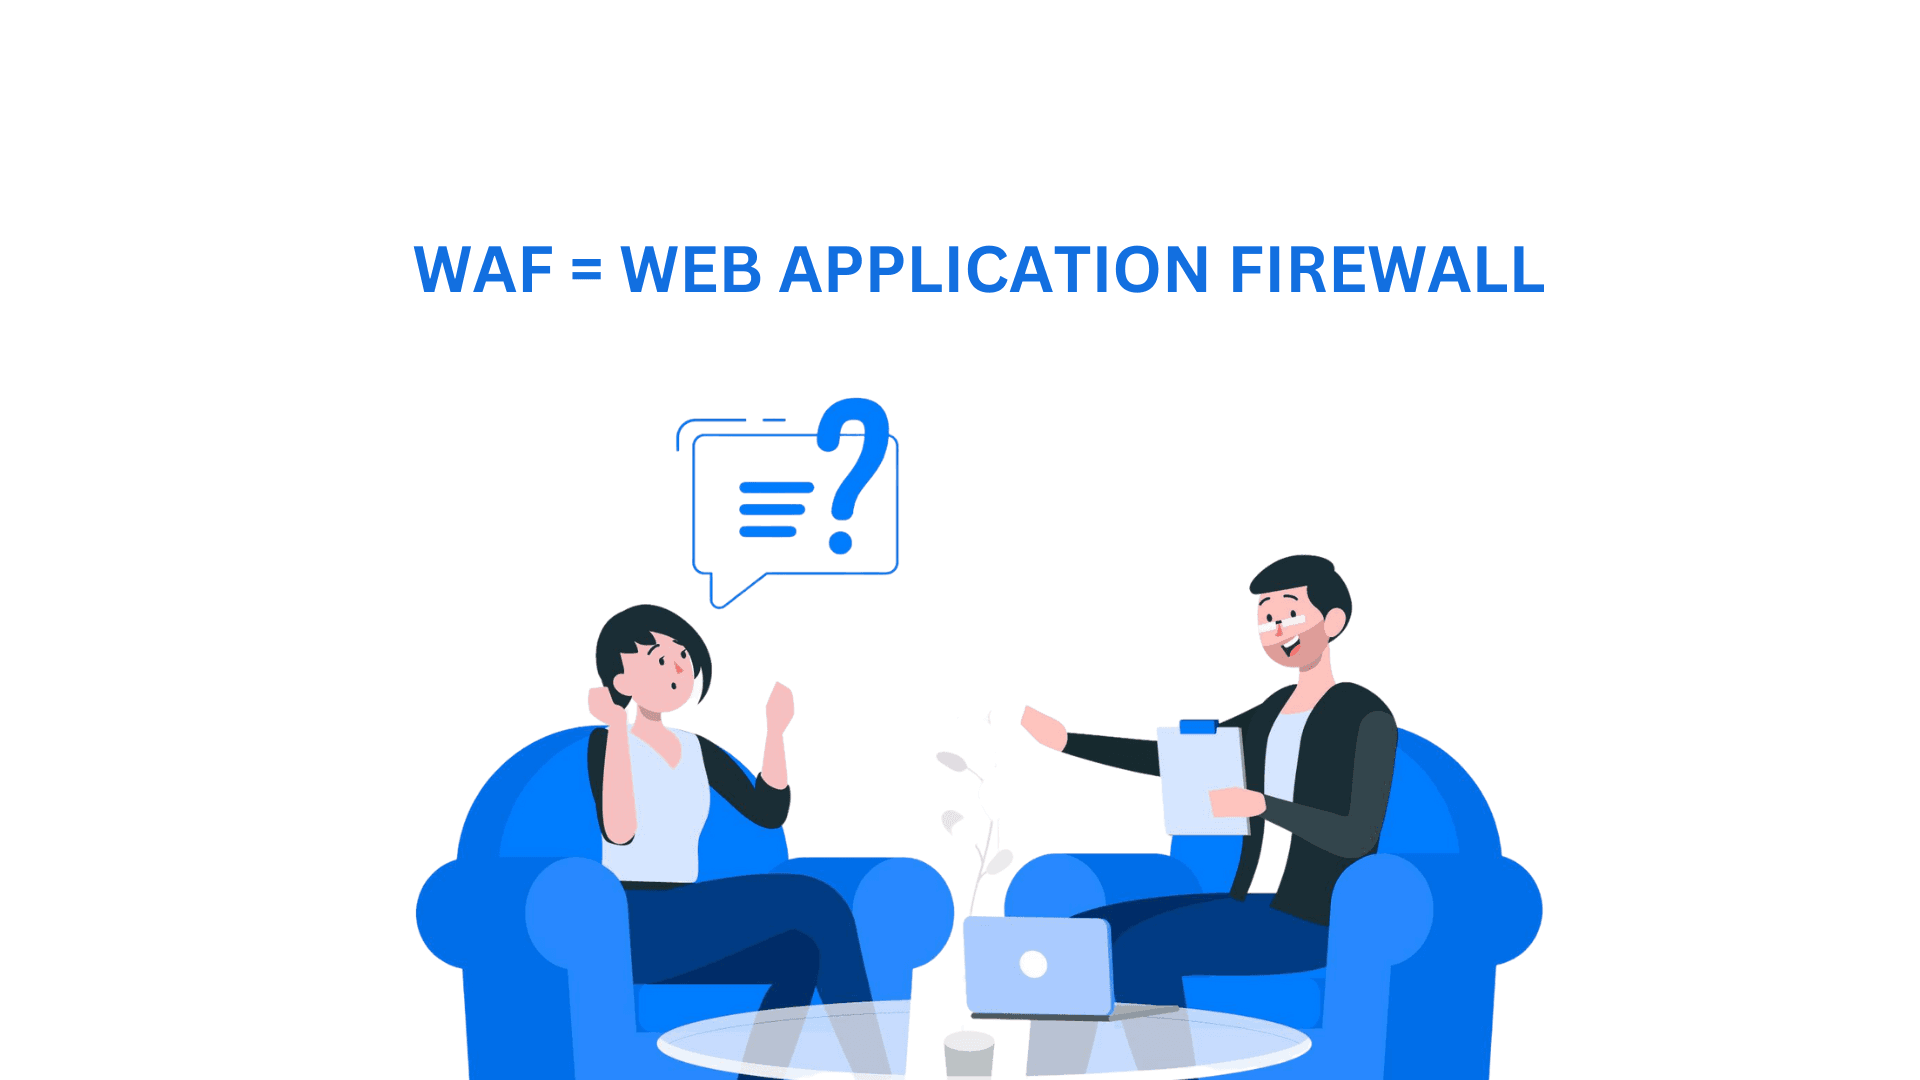 1. What is WAF?